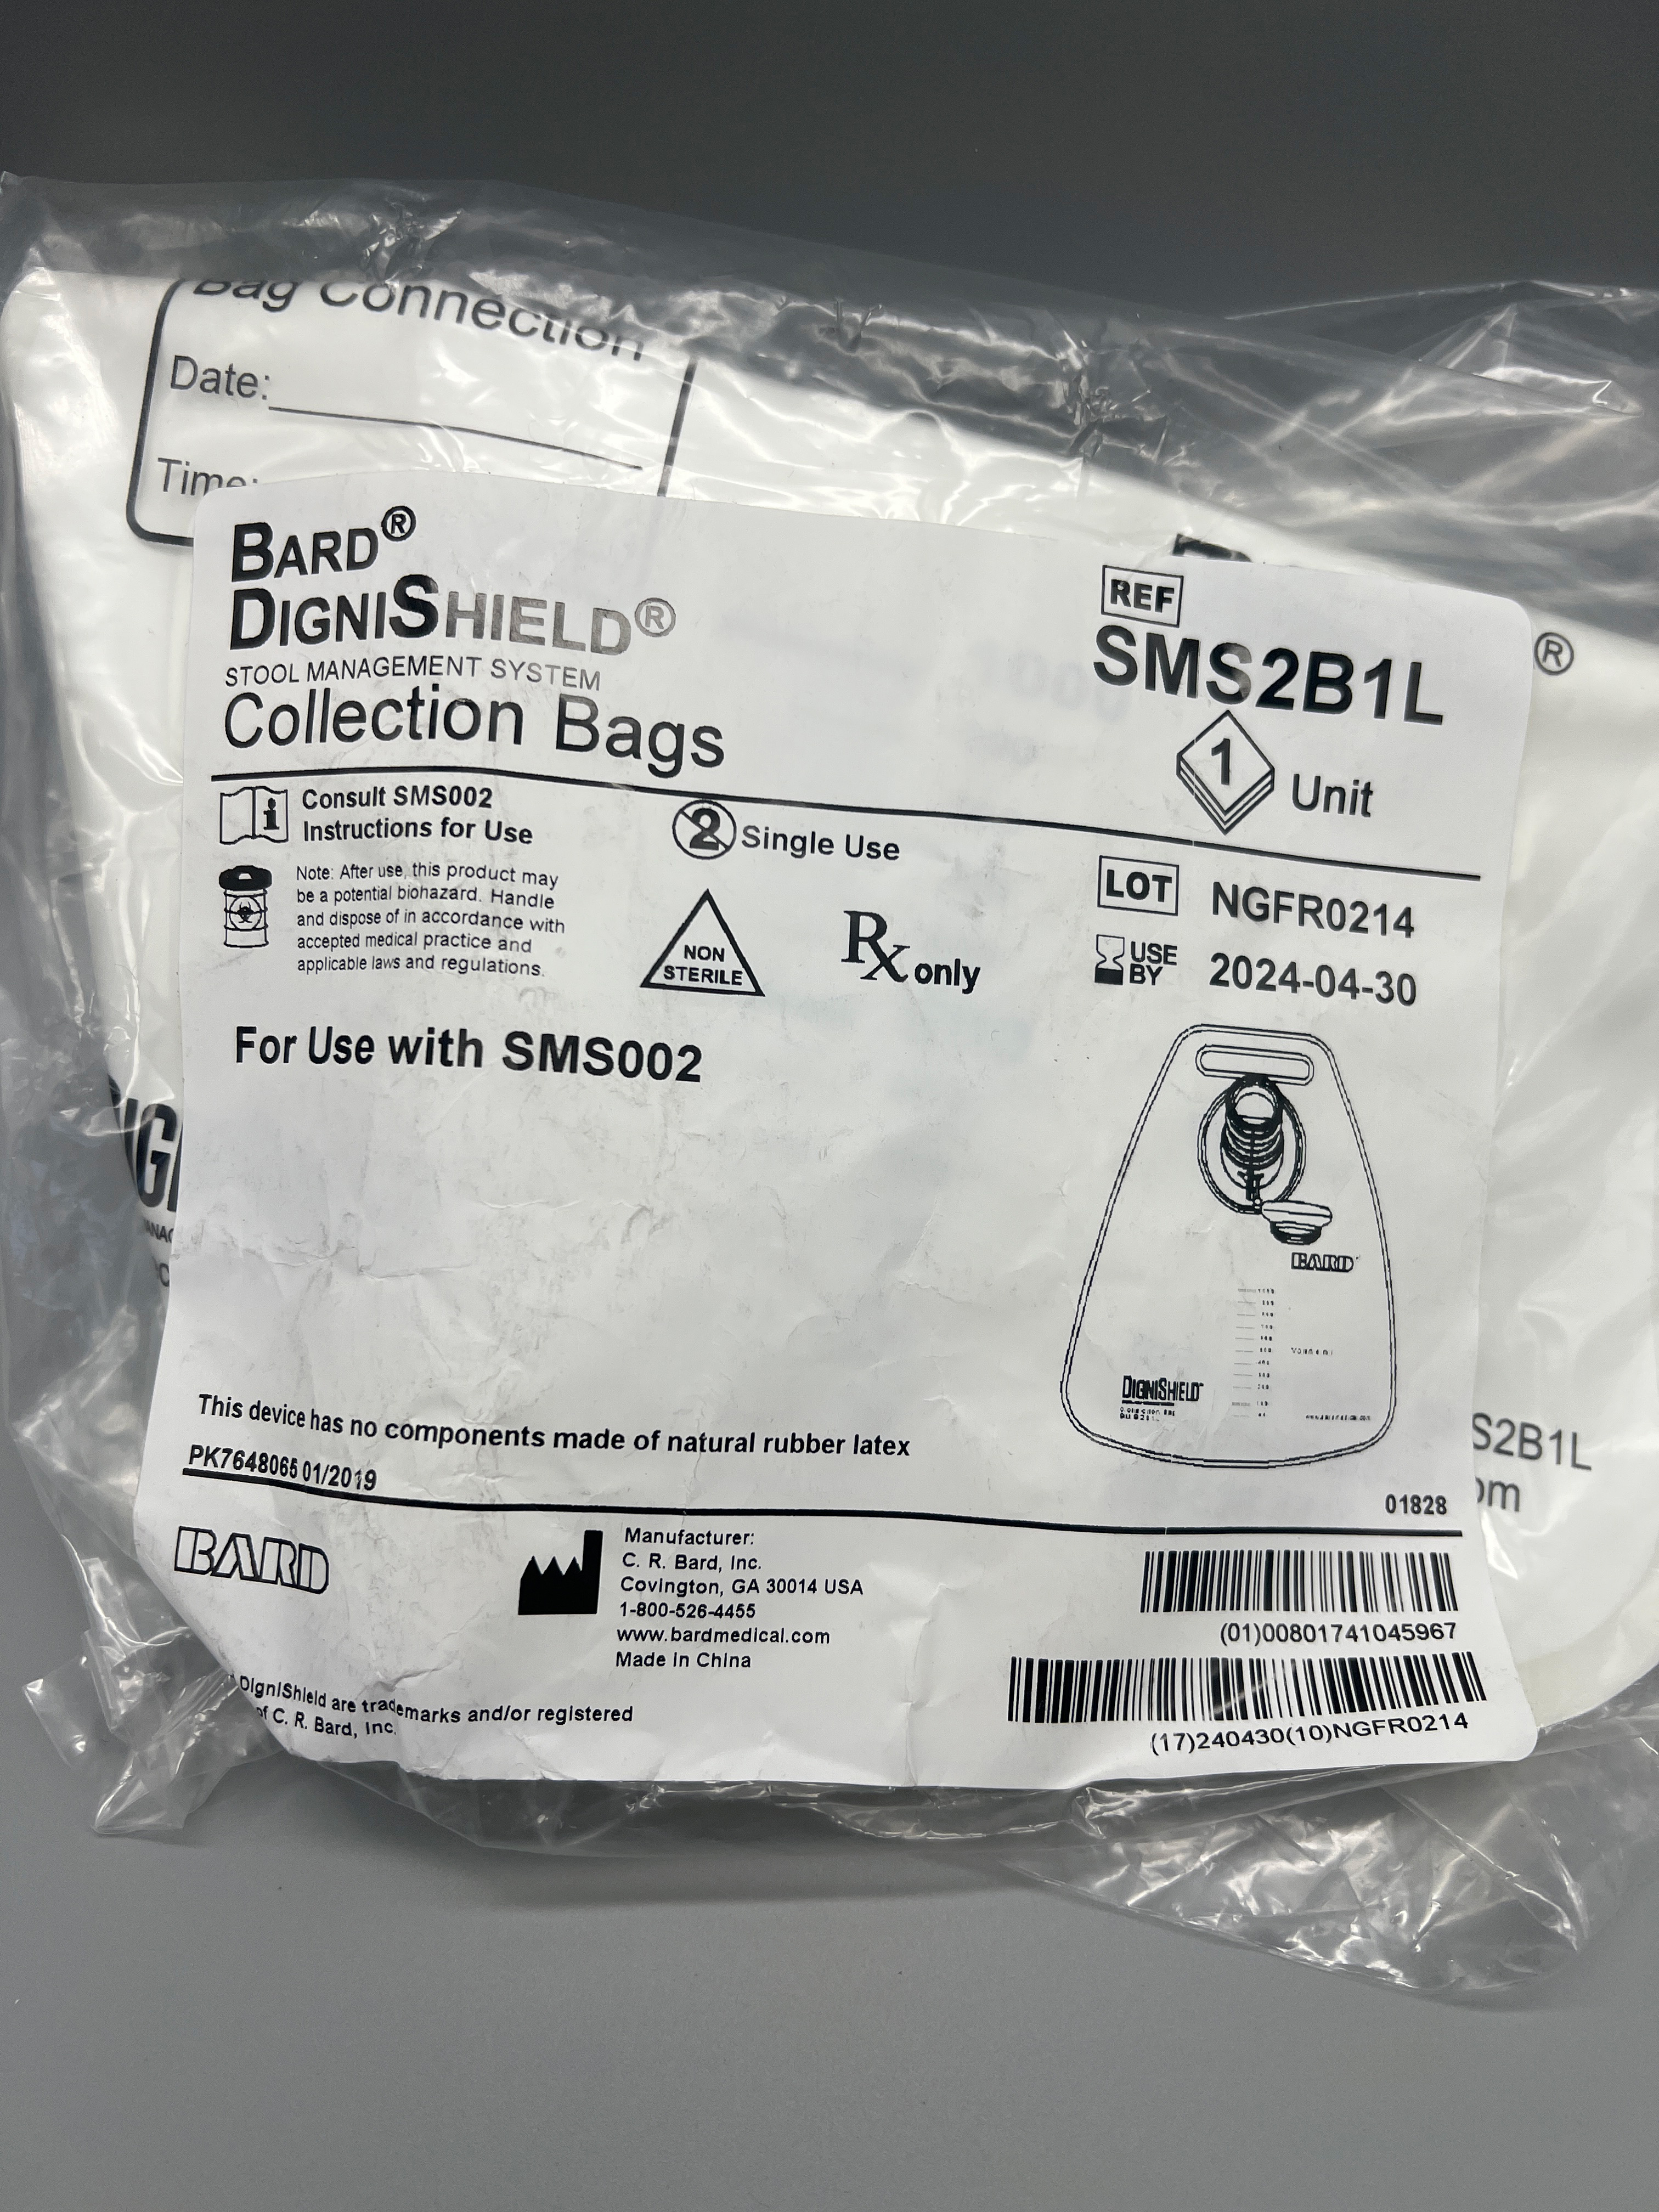 BARD DIGNISHIELD COLLECTION BAGS, FOR USE WITH SMS002